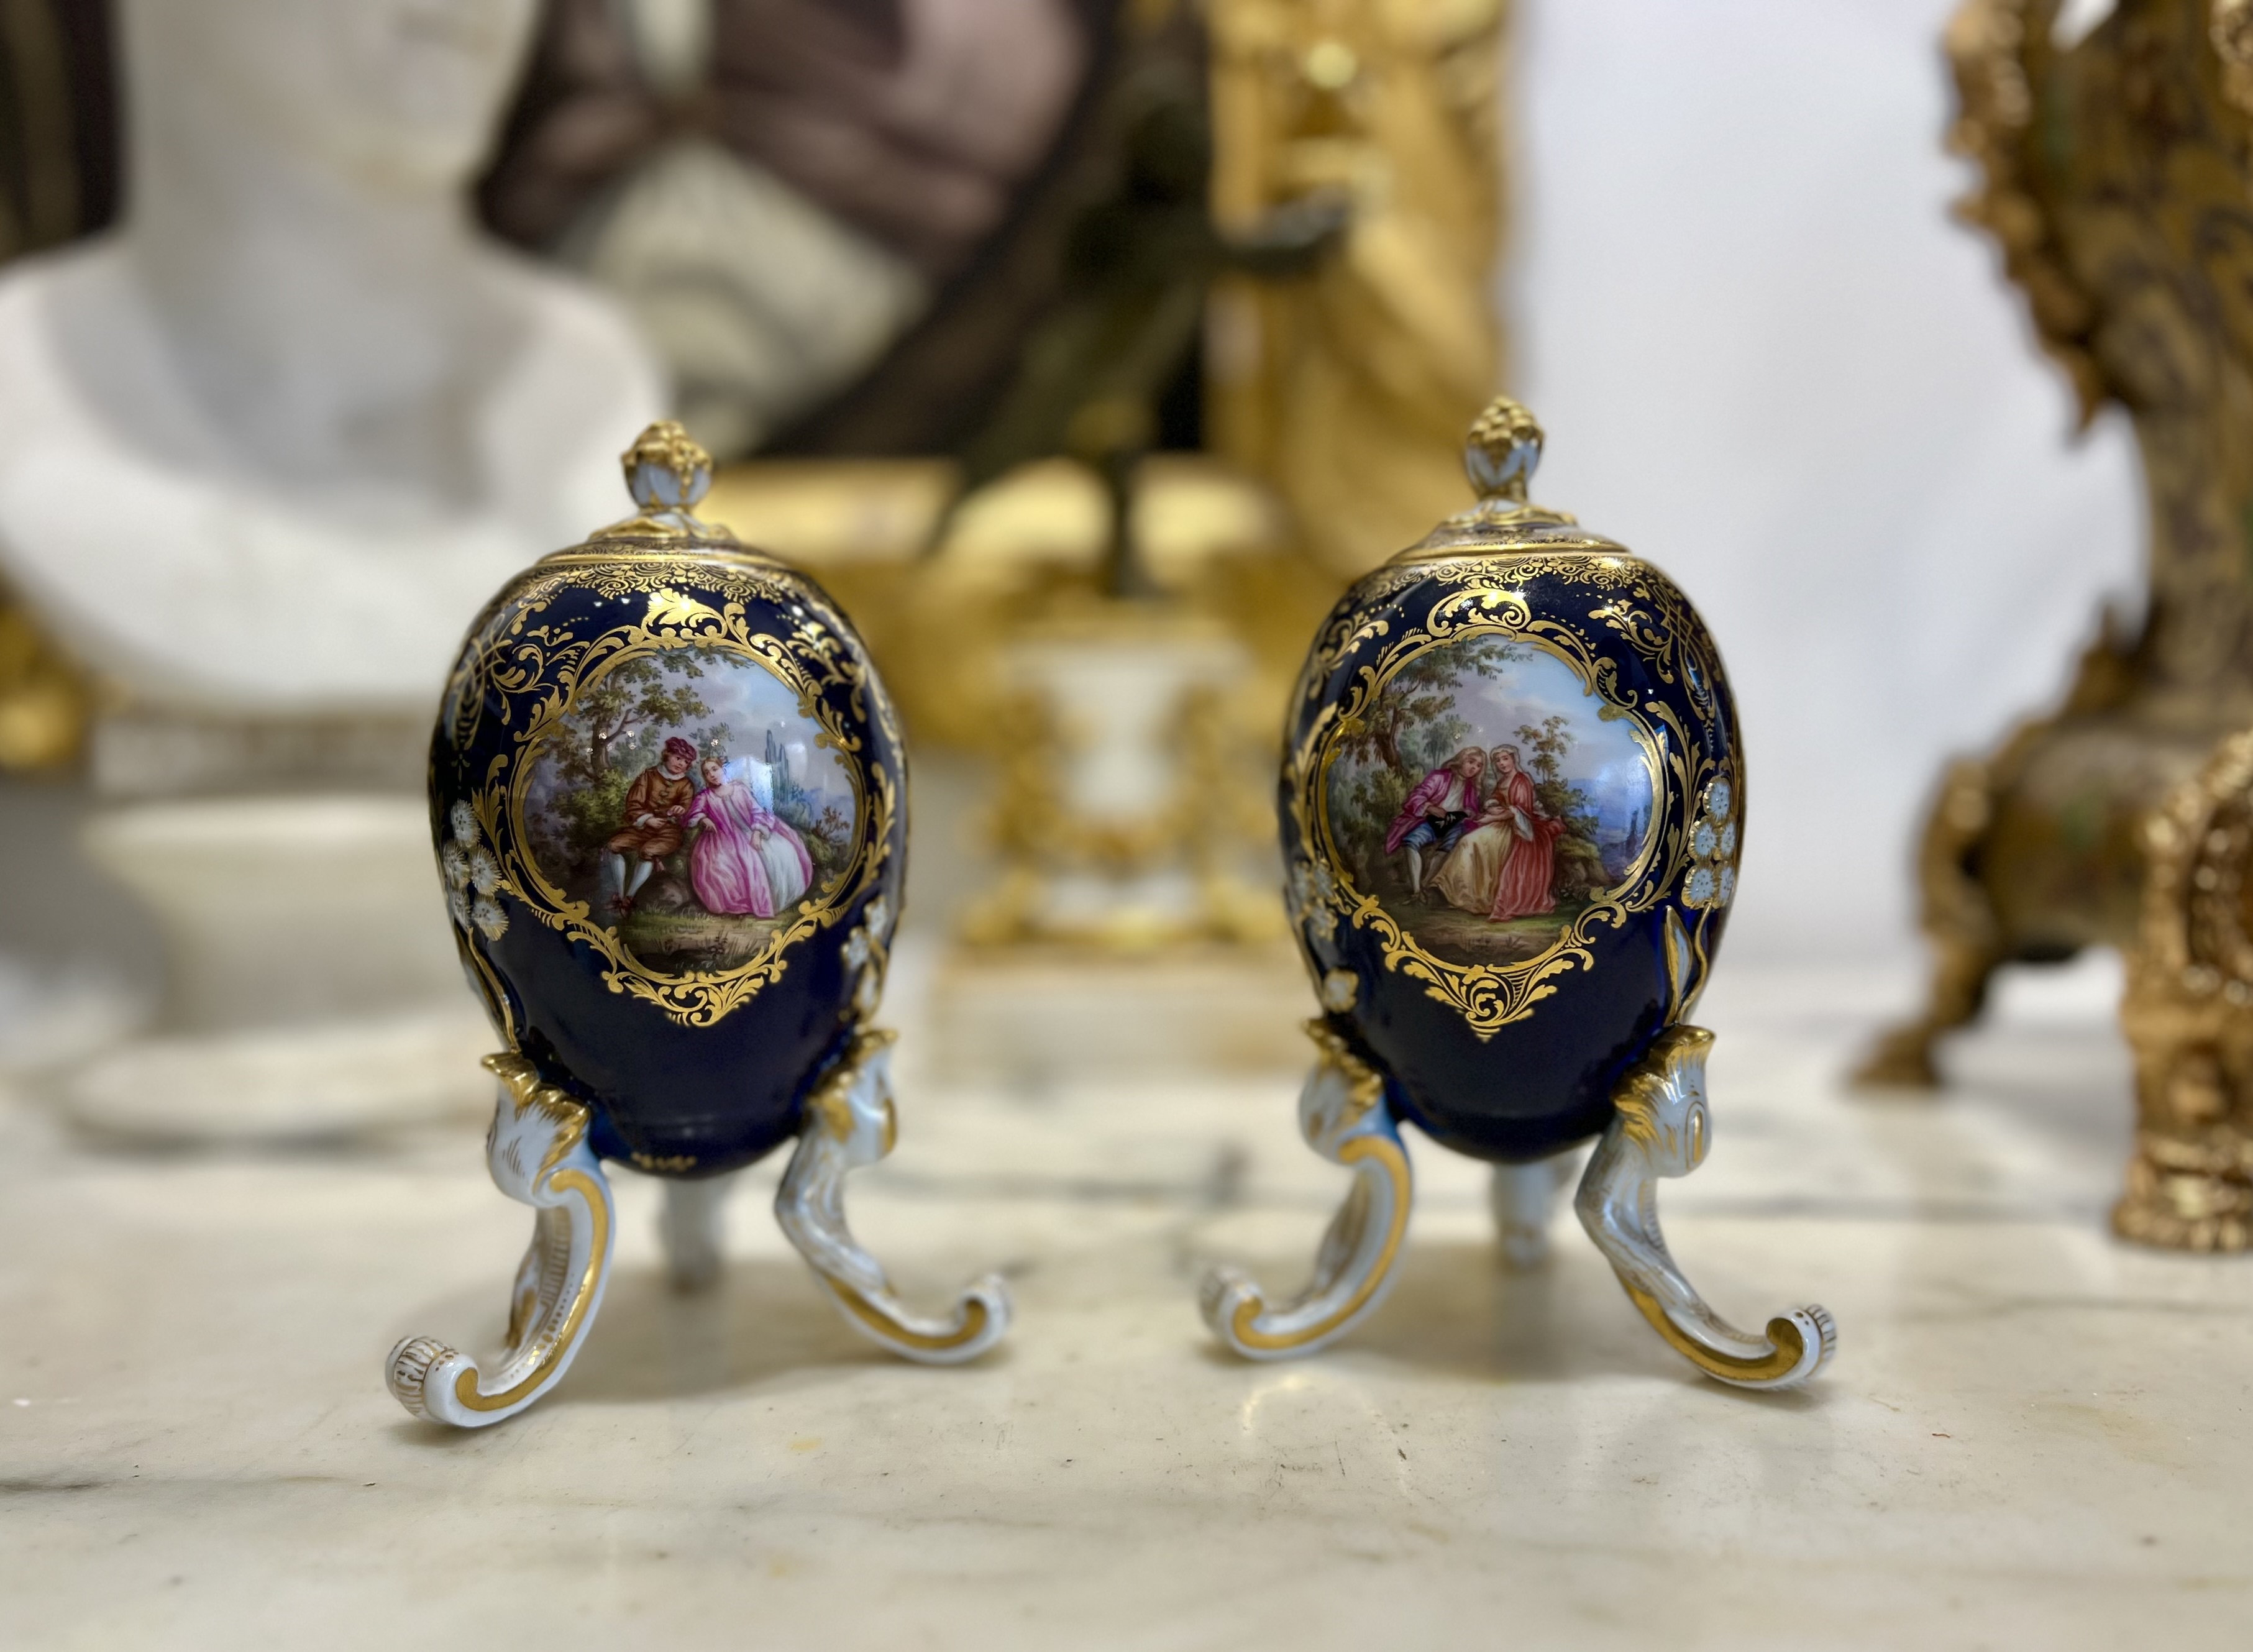 MEISSEN: A PAIR OF LATE 19TH / EARLY 20TH CENTURY PORCELAIN EGG SHAPED TEA CADDIES - Image 2 of 16